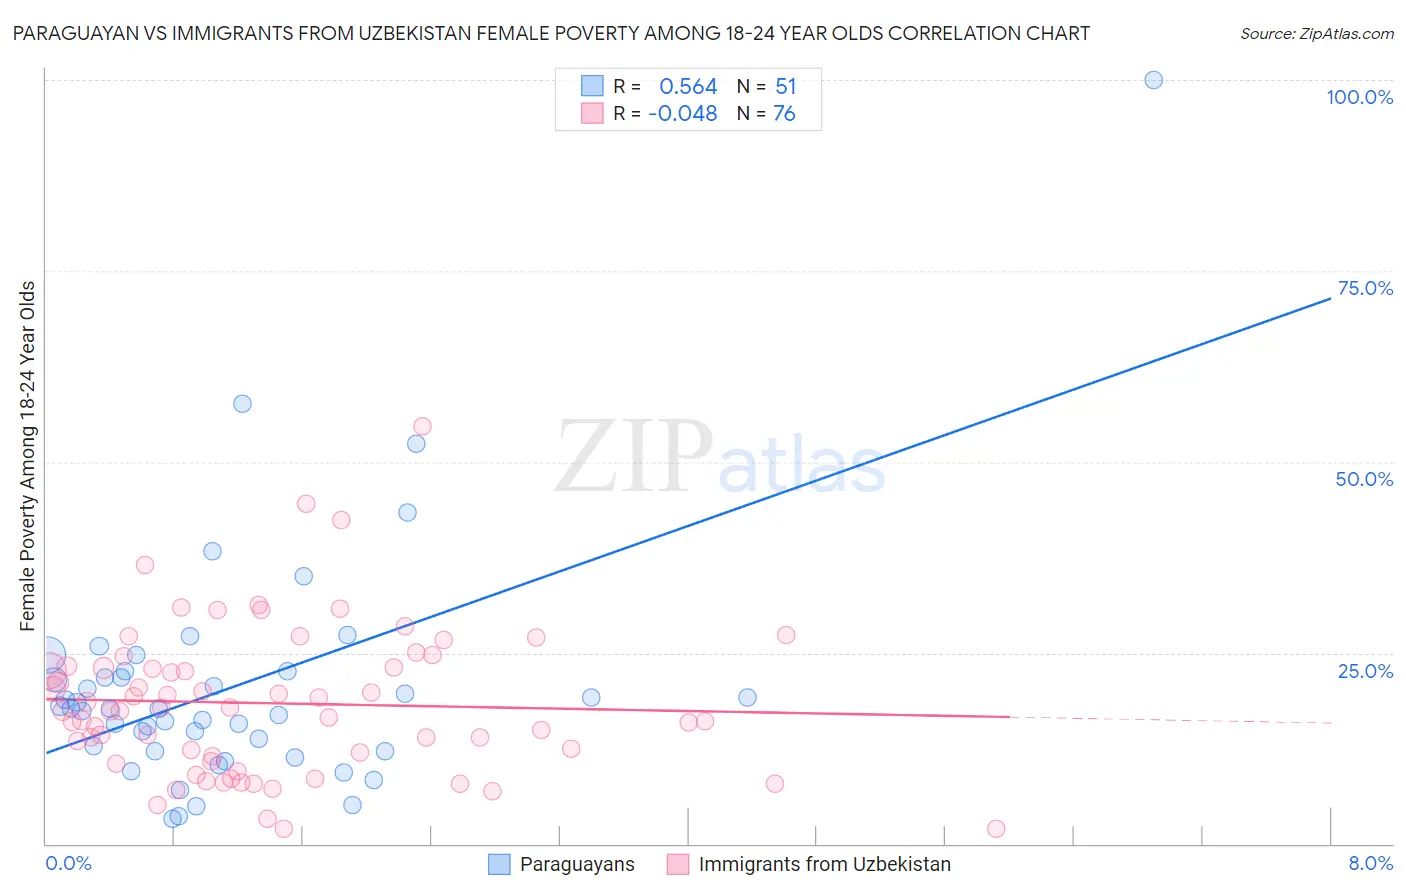 Paraguayan vs Immigrants from Uzbekistan Female Poverty Among 18-24 Year Olds